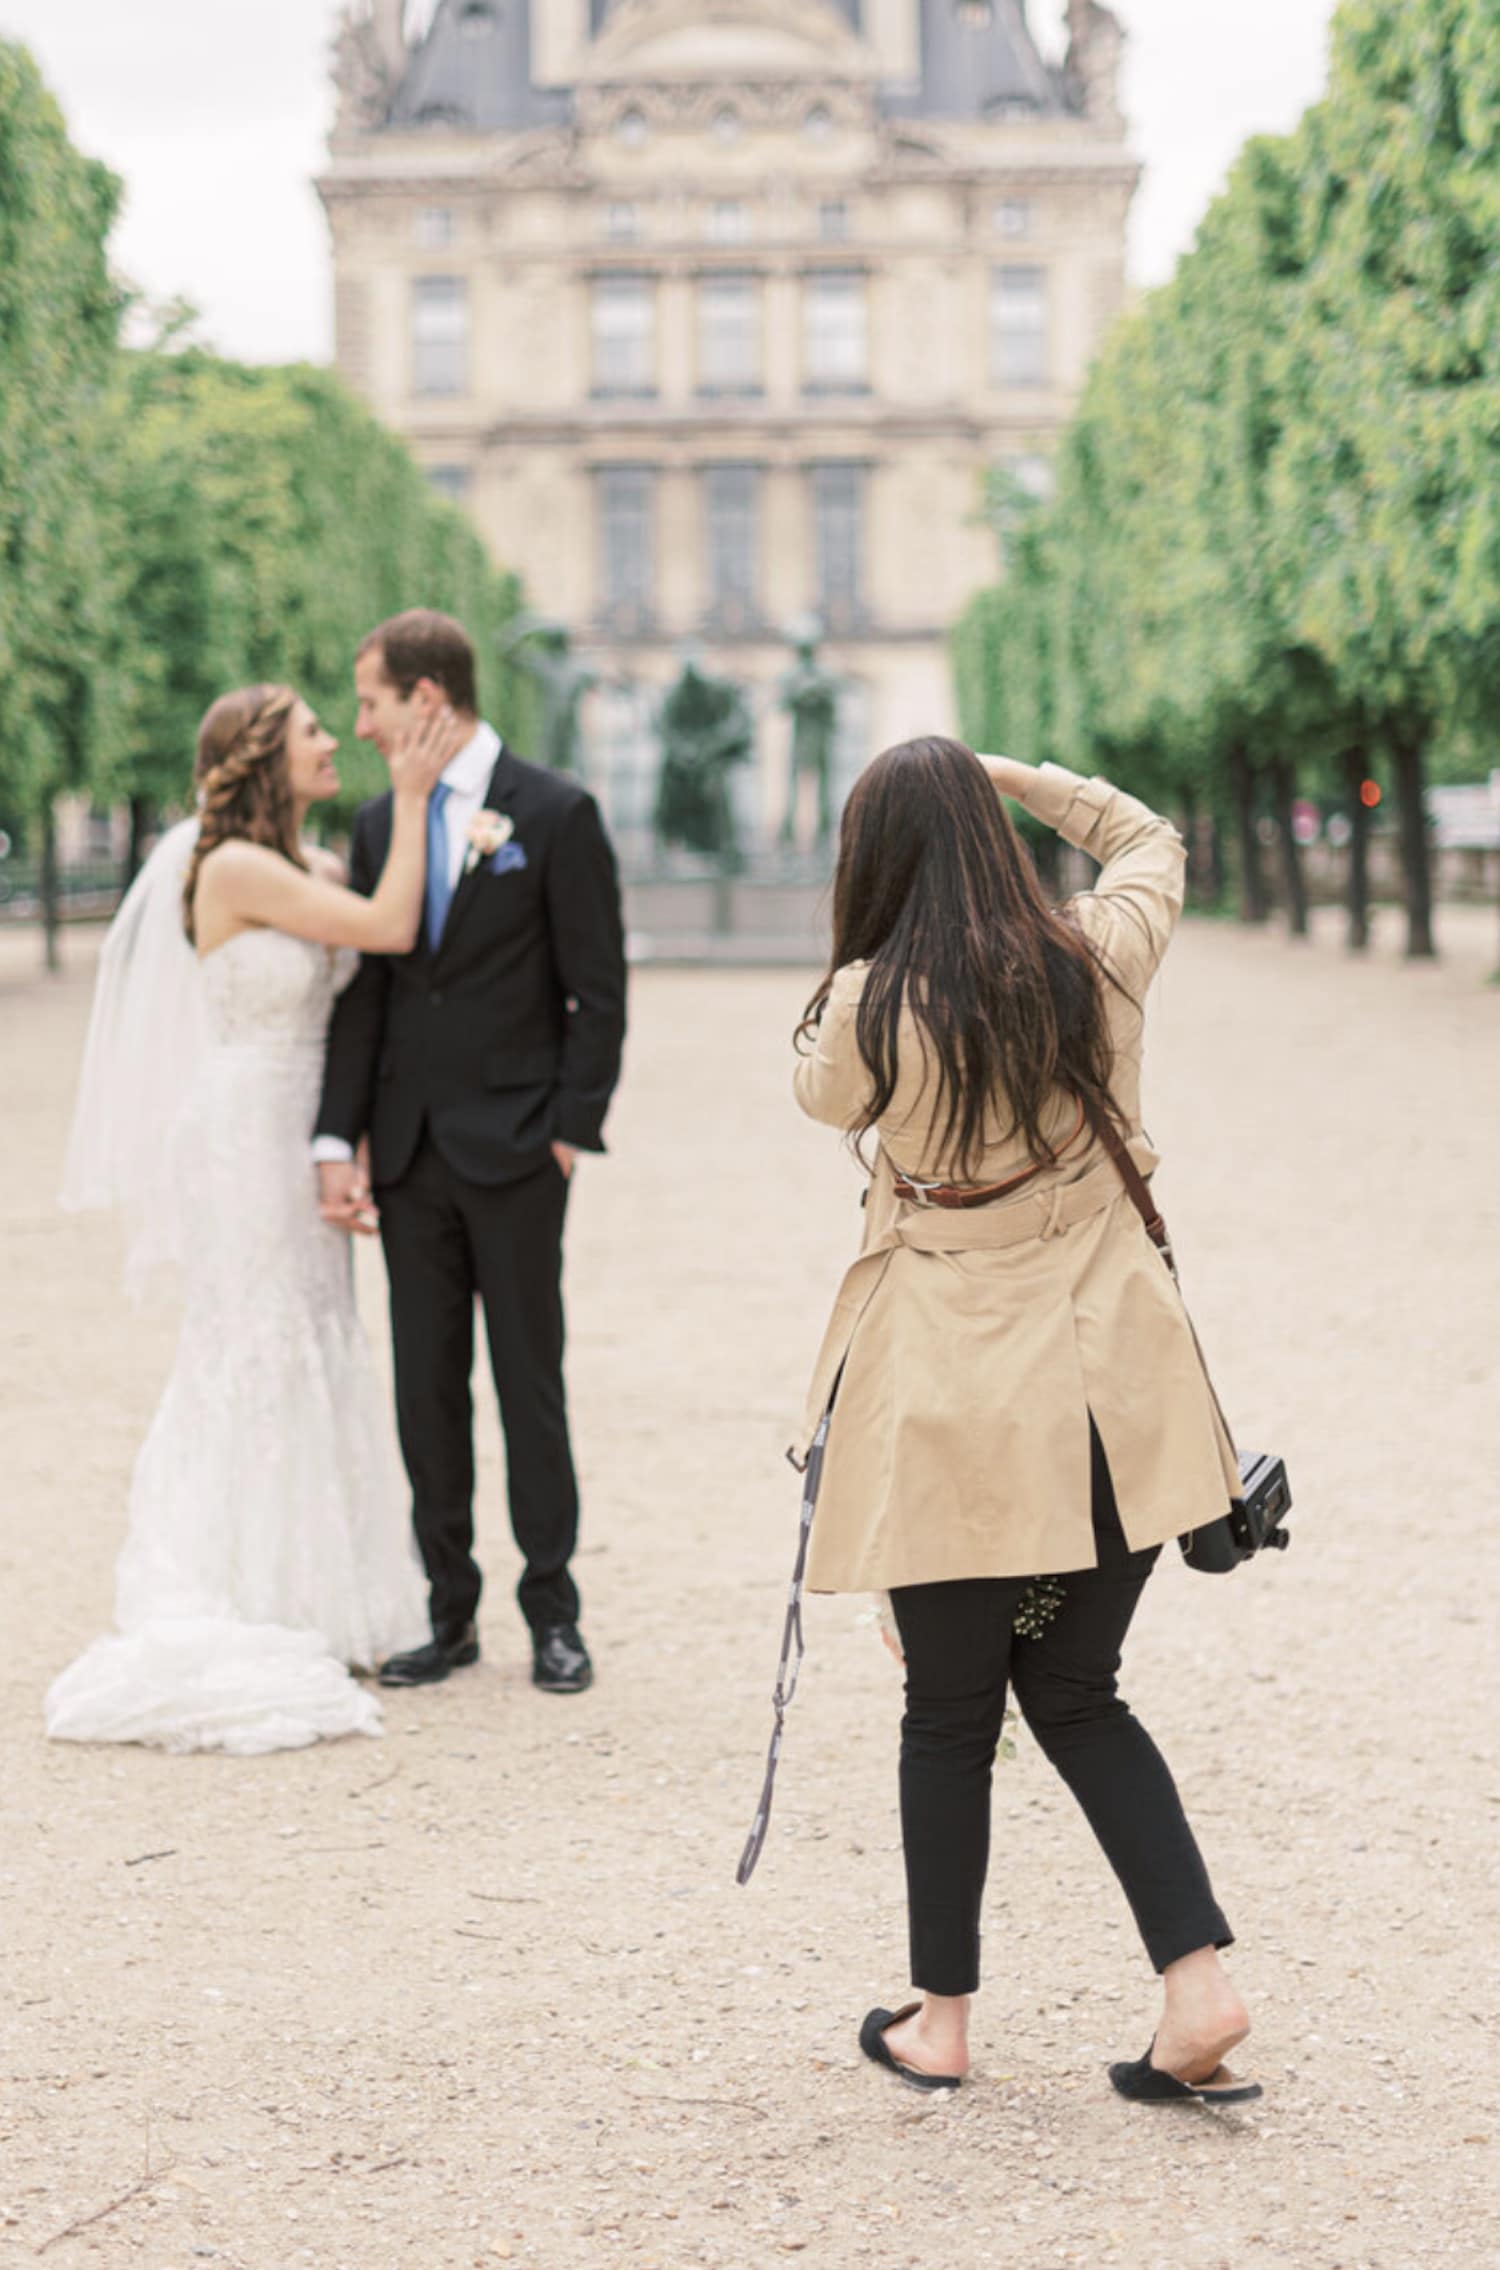 How Much Do Wedding Photographers Make (2021). Marcela Diaz takes photo of bride and groom outside a Victorian mansion